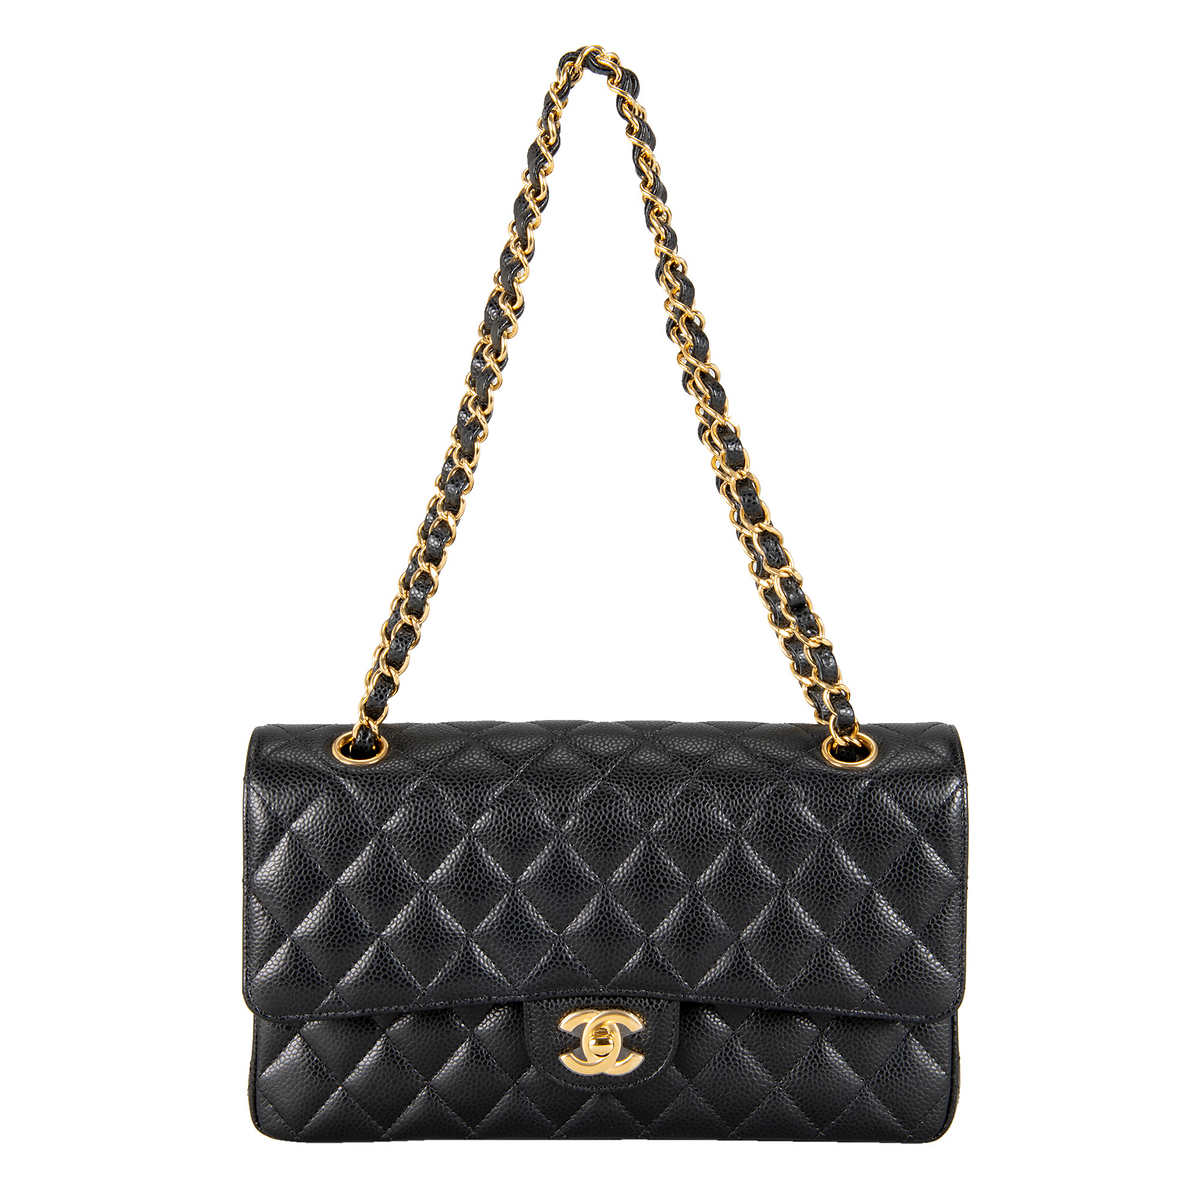 Bags, Chanel Paper Bag For Small Leather Goods